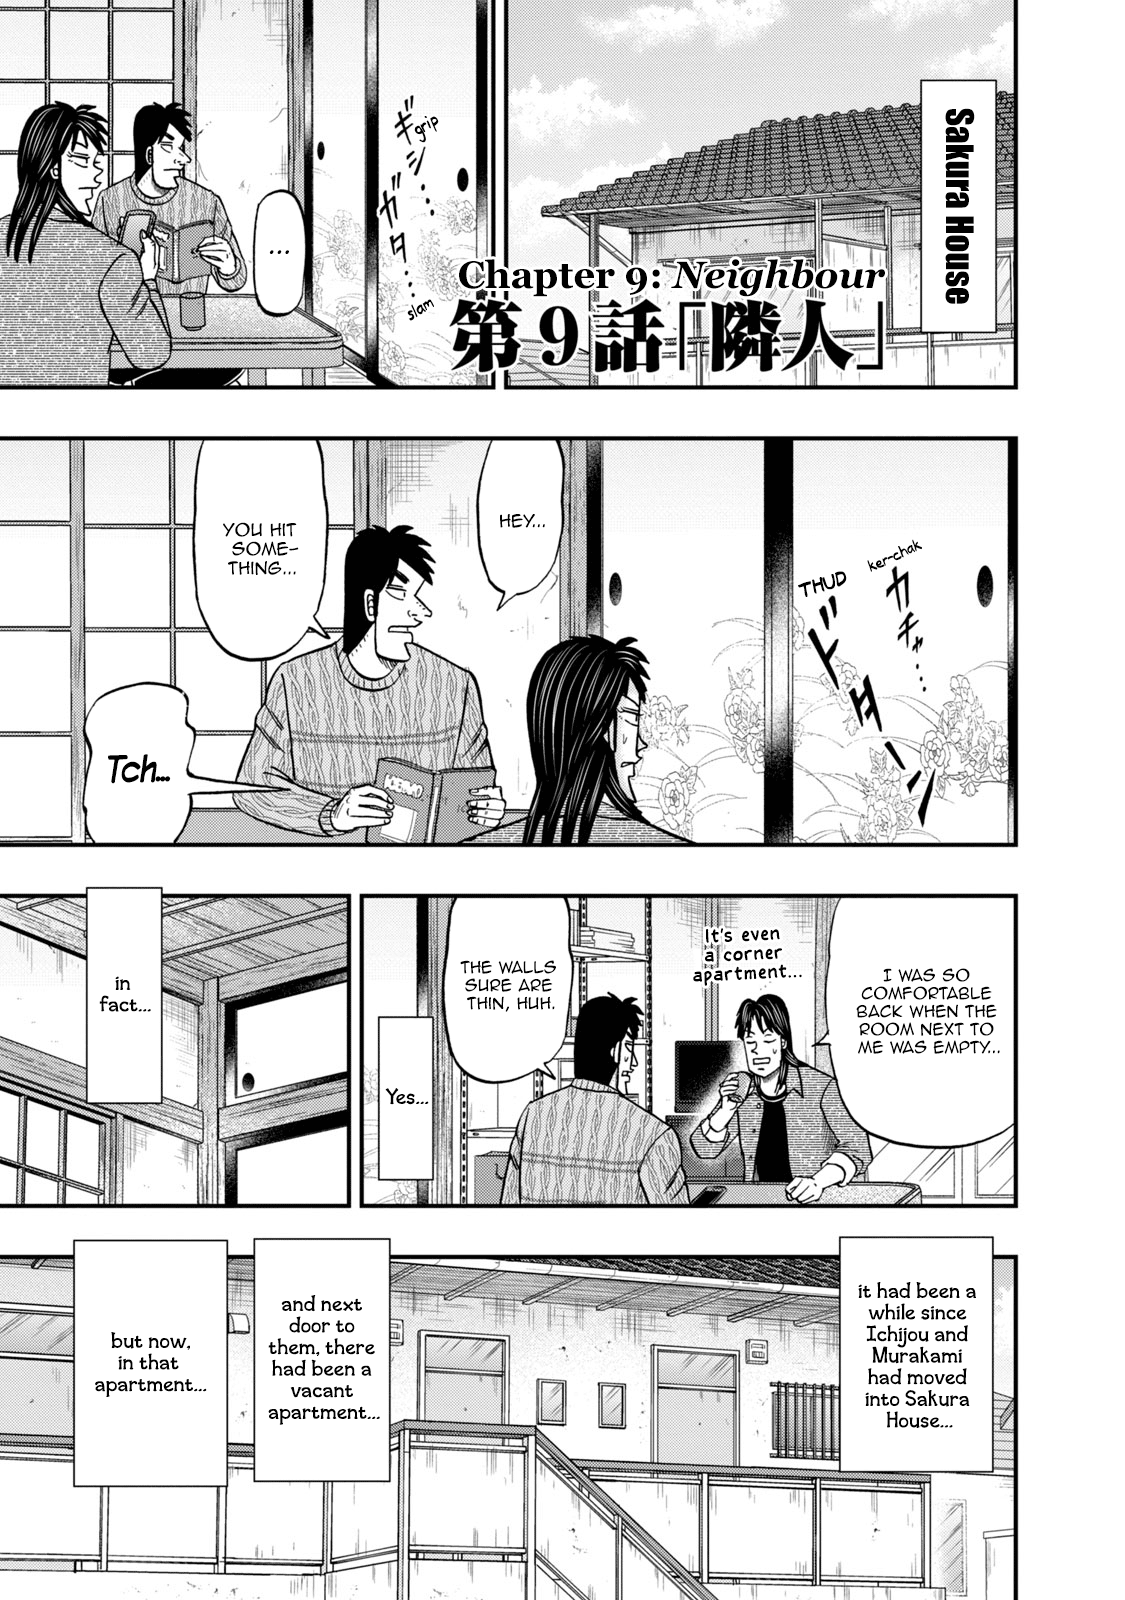 Life In Tokyo Ichijou Vol.2 Chapter 9: Neighbour - Picture 1